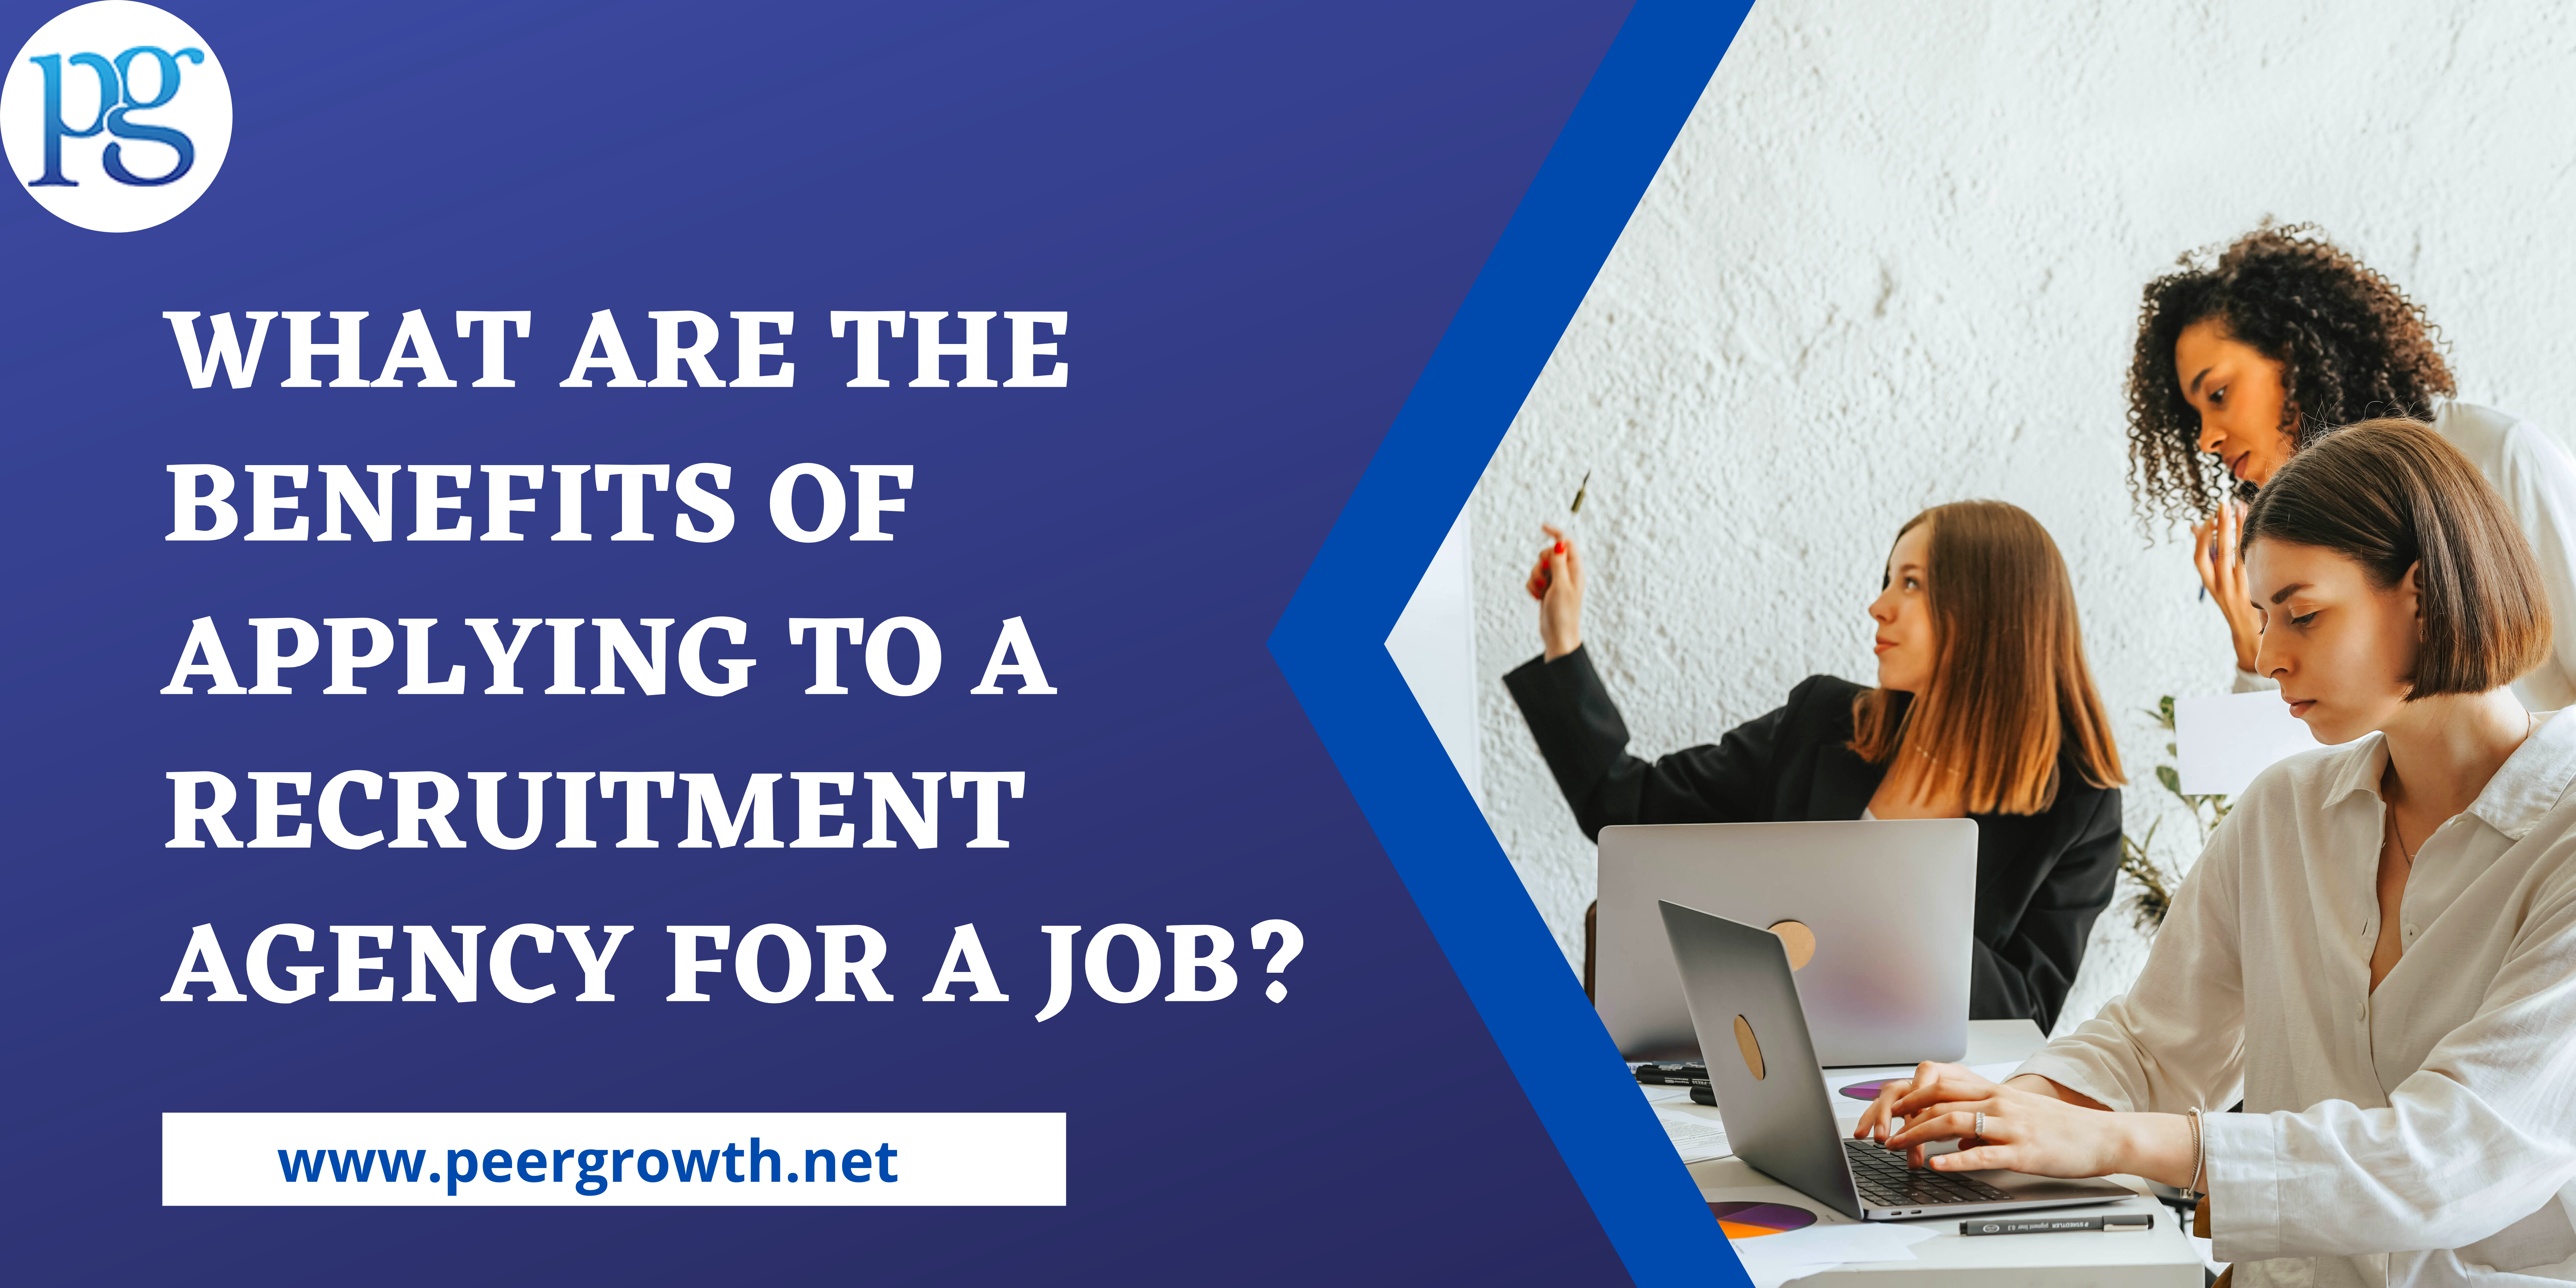 What Are The Benefits of Applying To A Recruitment Agency For A Job?